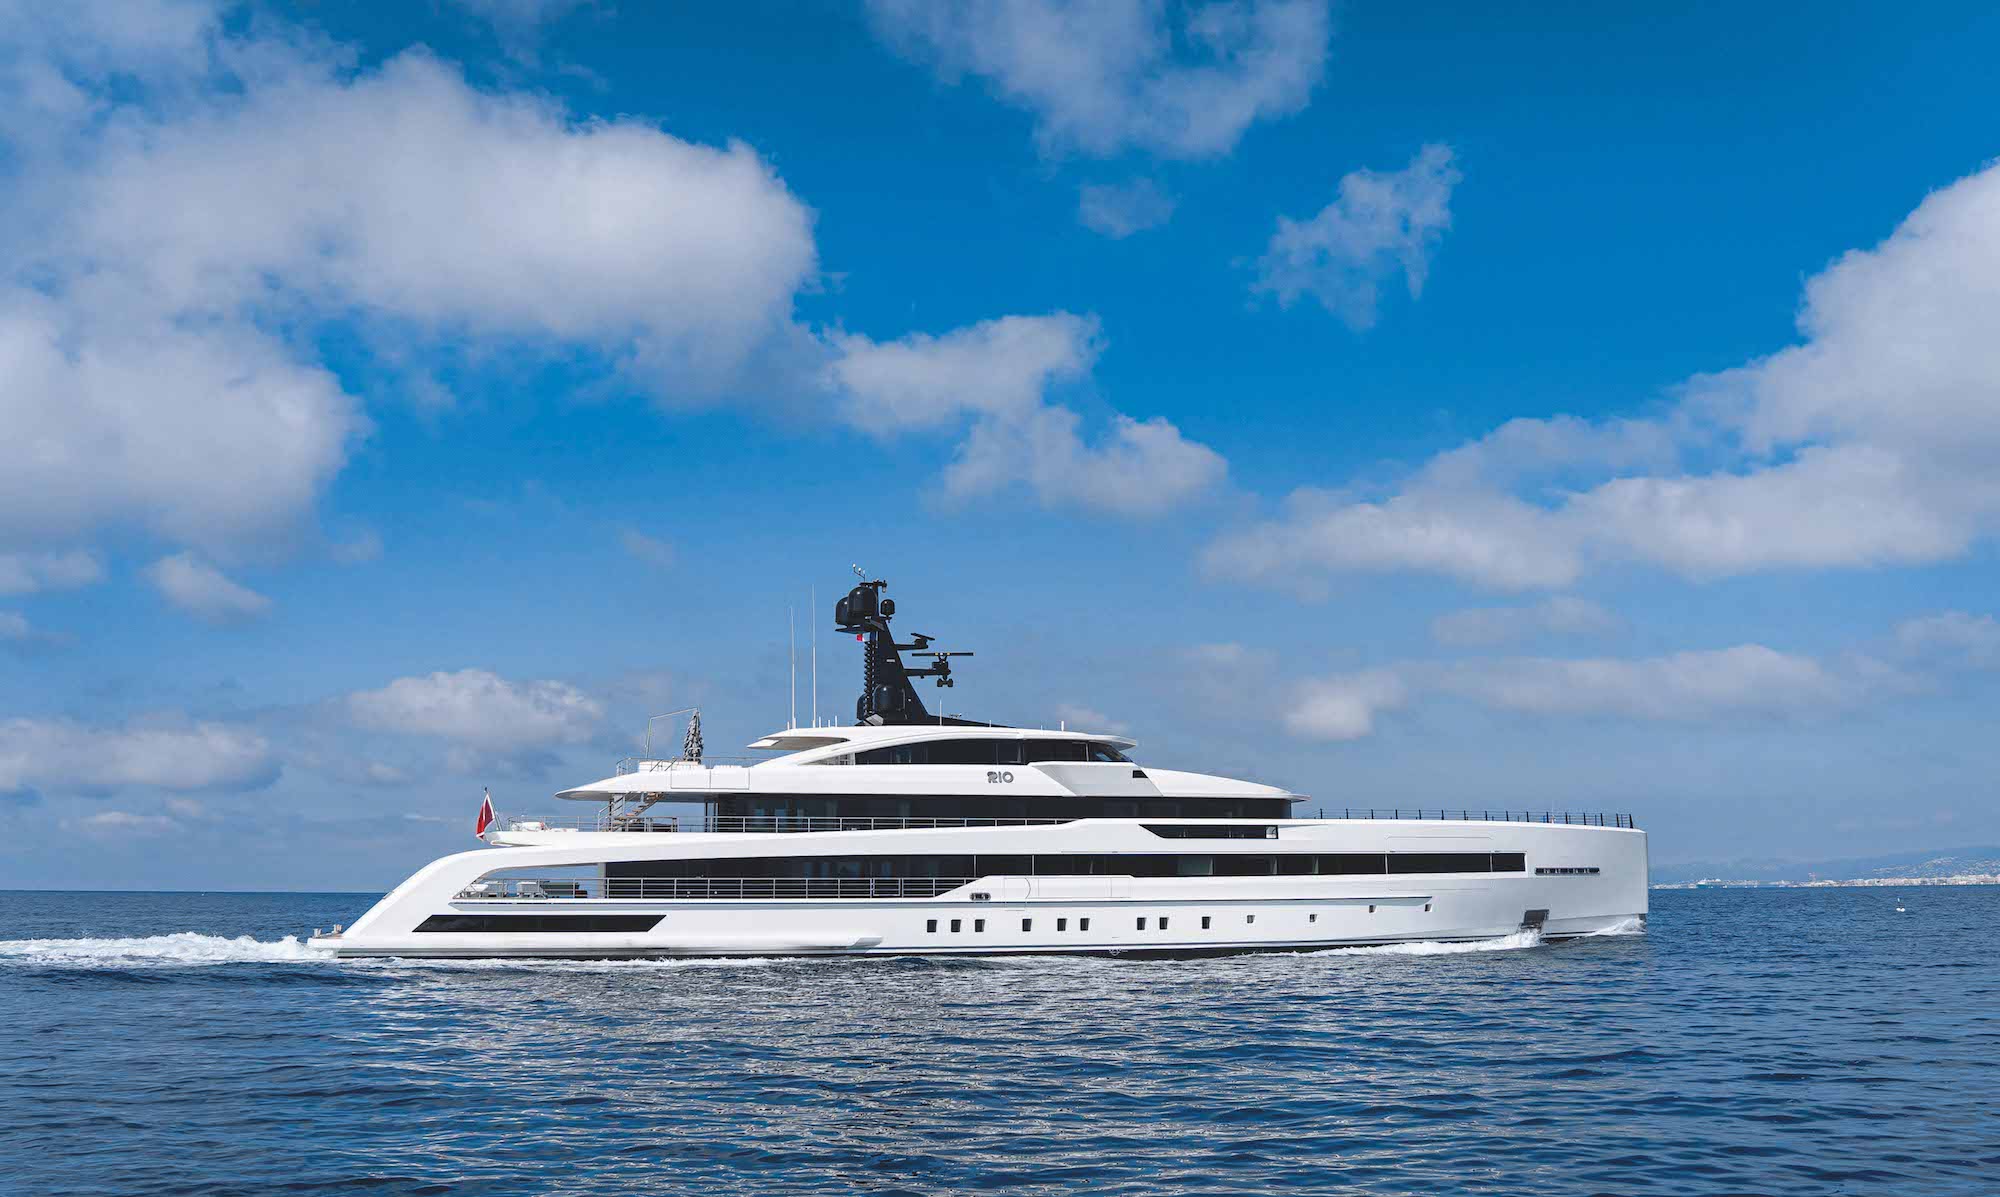 crn superyacht builder monaco yacht show 2022 event novelties omega architects pulina exclusive yachting-event